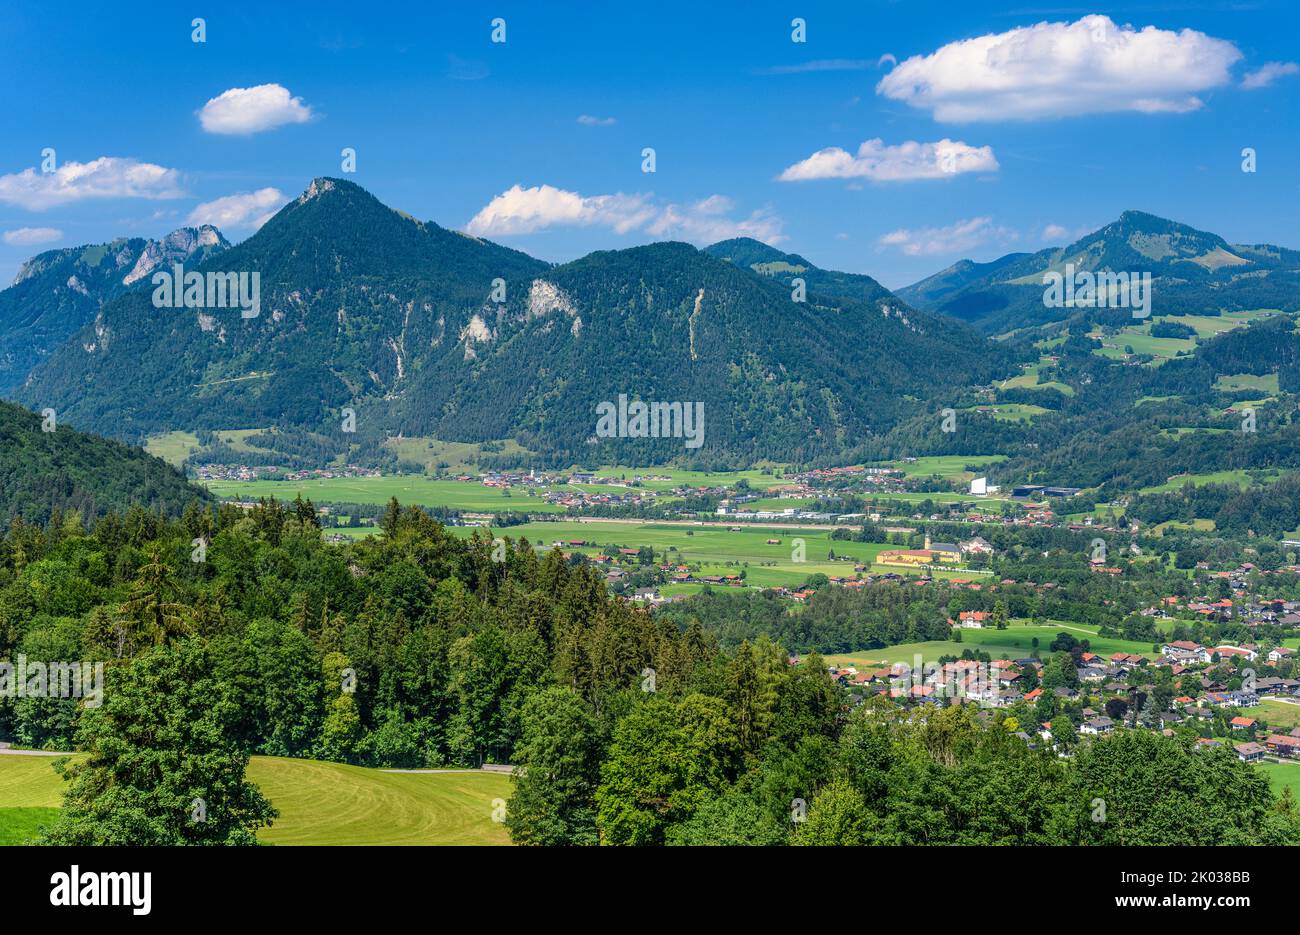 Germany, Bavaria, county Rosenheim, Oberaudorf, view from Hocheck chair lift over Inn valley against Chiemgau Alps Stock Photo